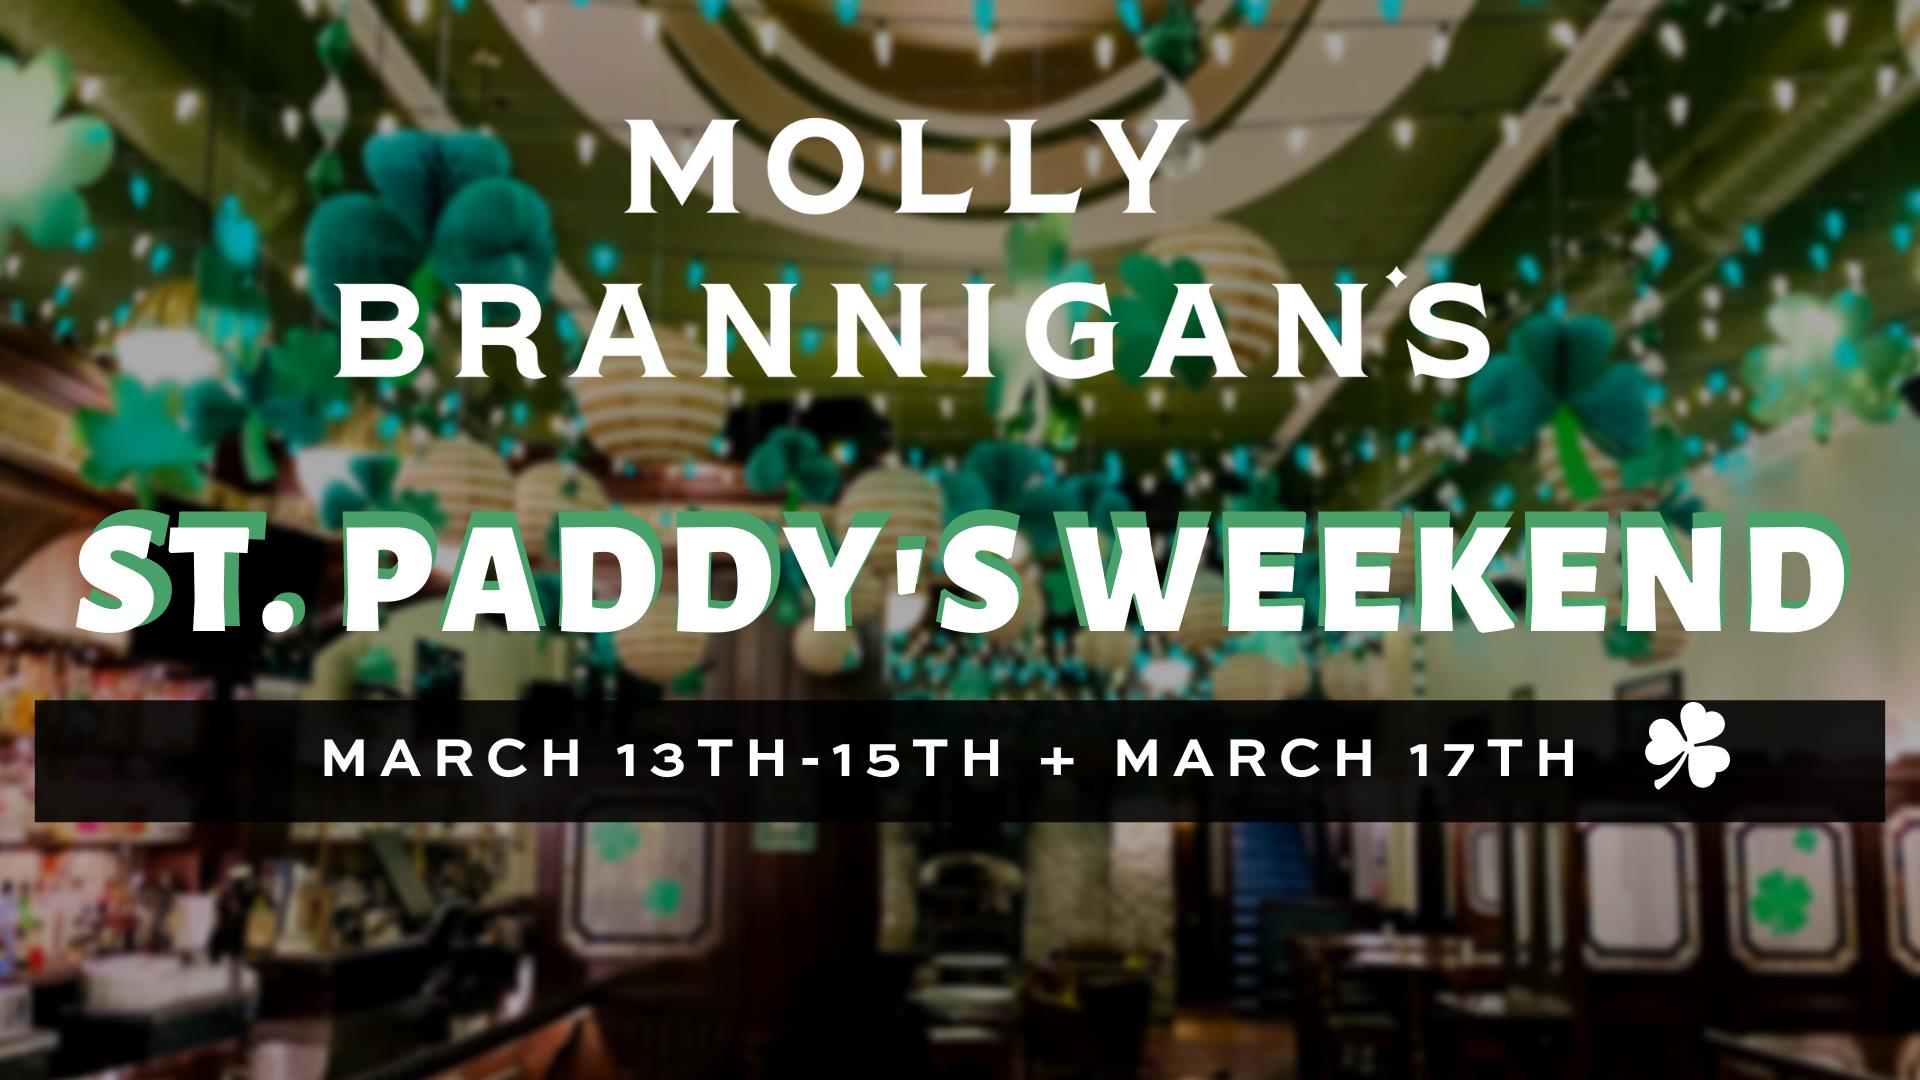 Molly Brannigan's St. Paddy's Weekend 2020